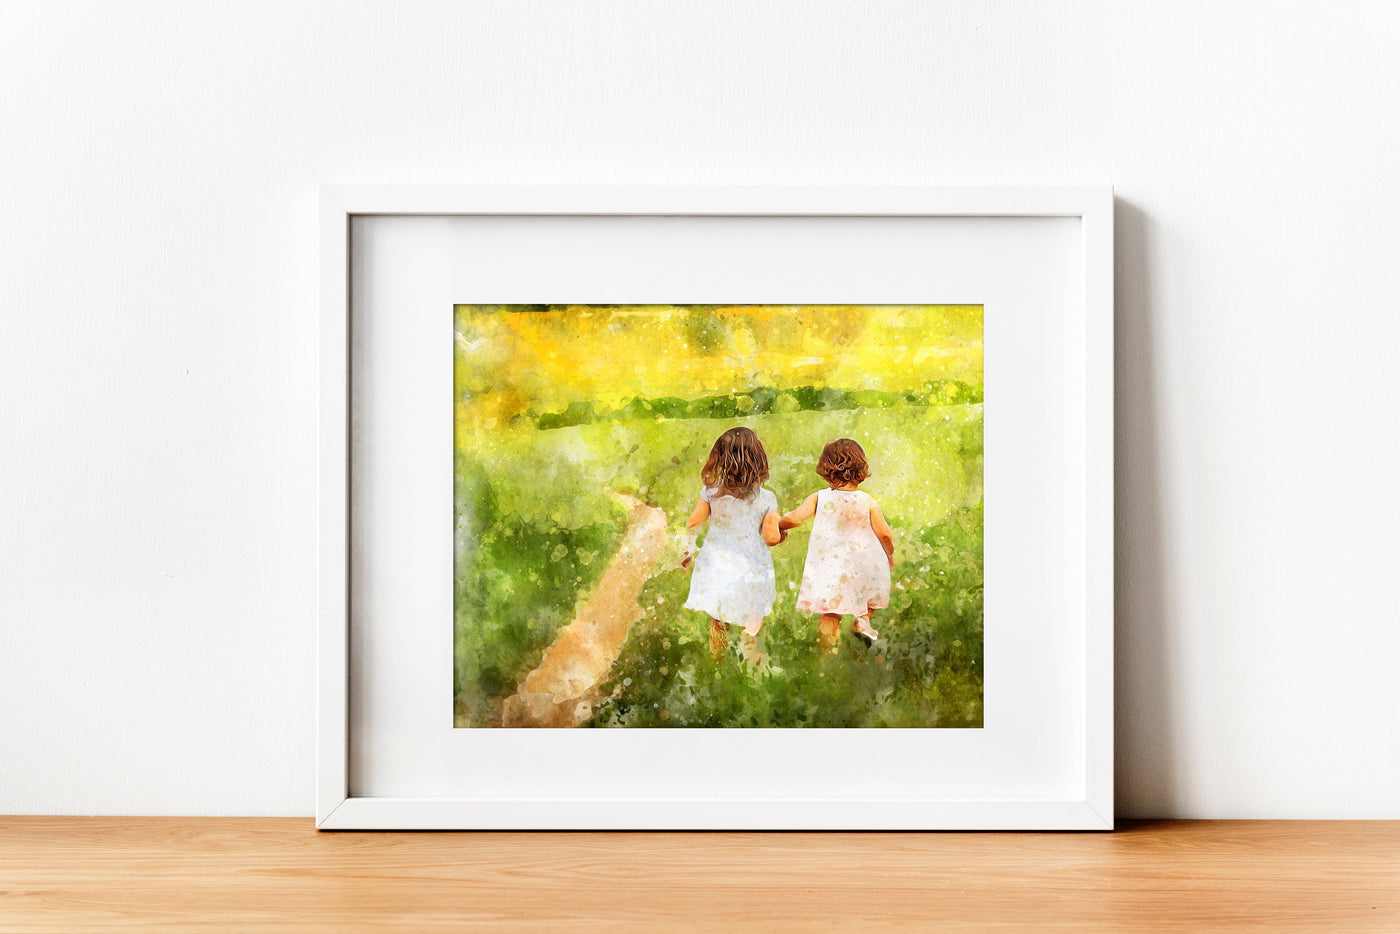 Personalized Twins Gift | Baby Gifts for Girls | Birthday Gift for Twin Sister | Twins Boys First Birthday | Custom Portrait from Photo | Photo Wall Art